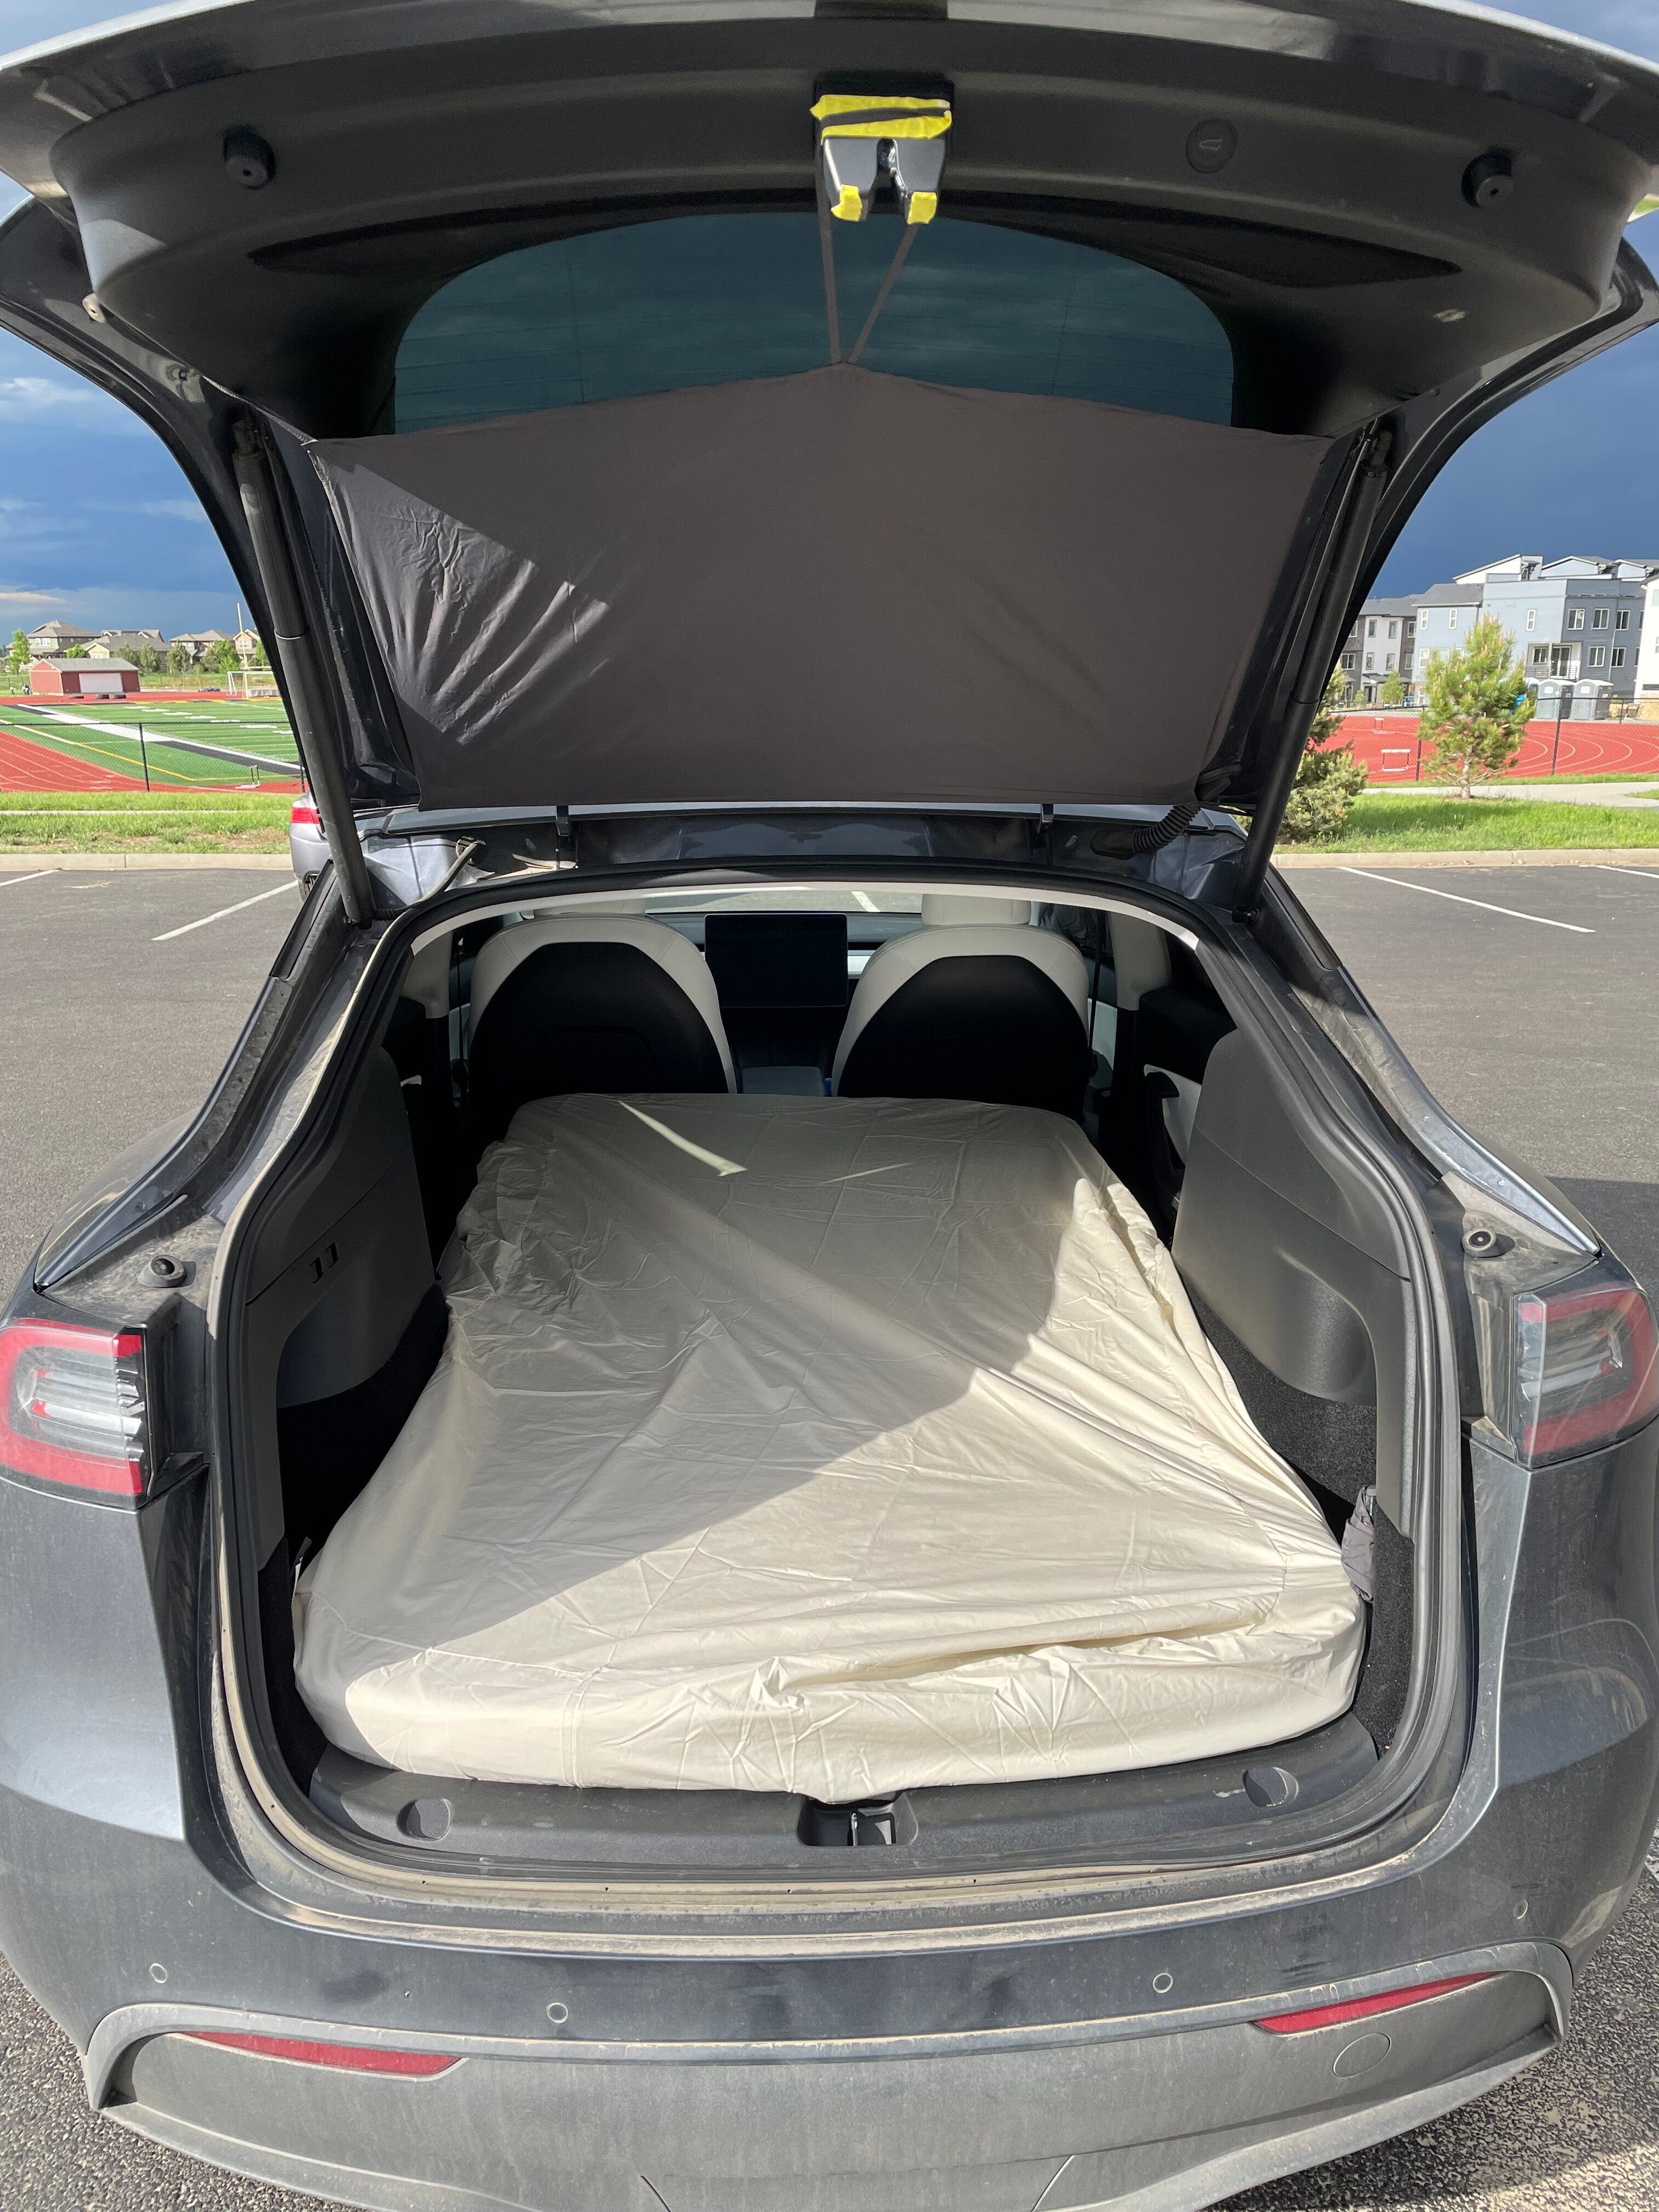 CleanTechnica Tested: TESCAMP Mattress, Y Not Sleep In Your Tesla? -  CleanTechnica